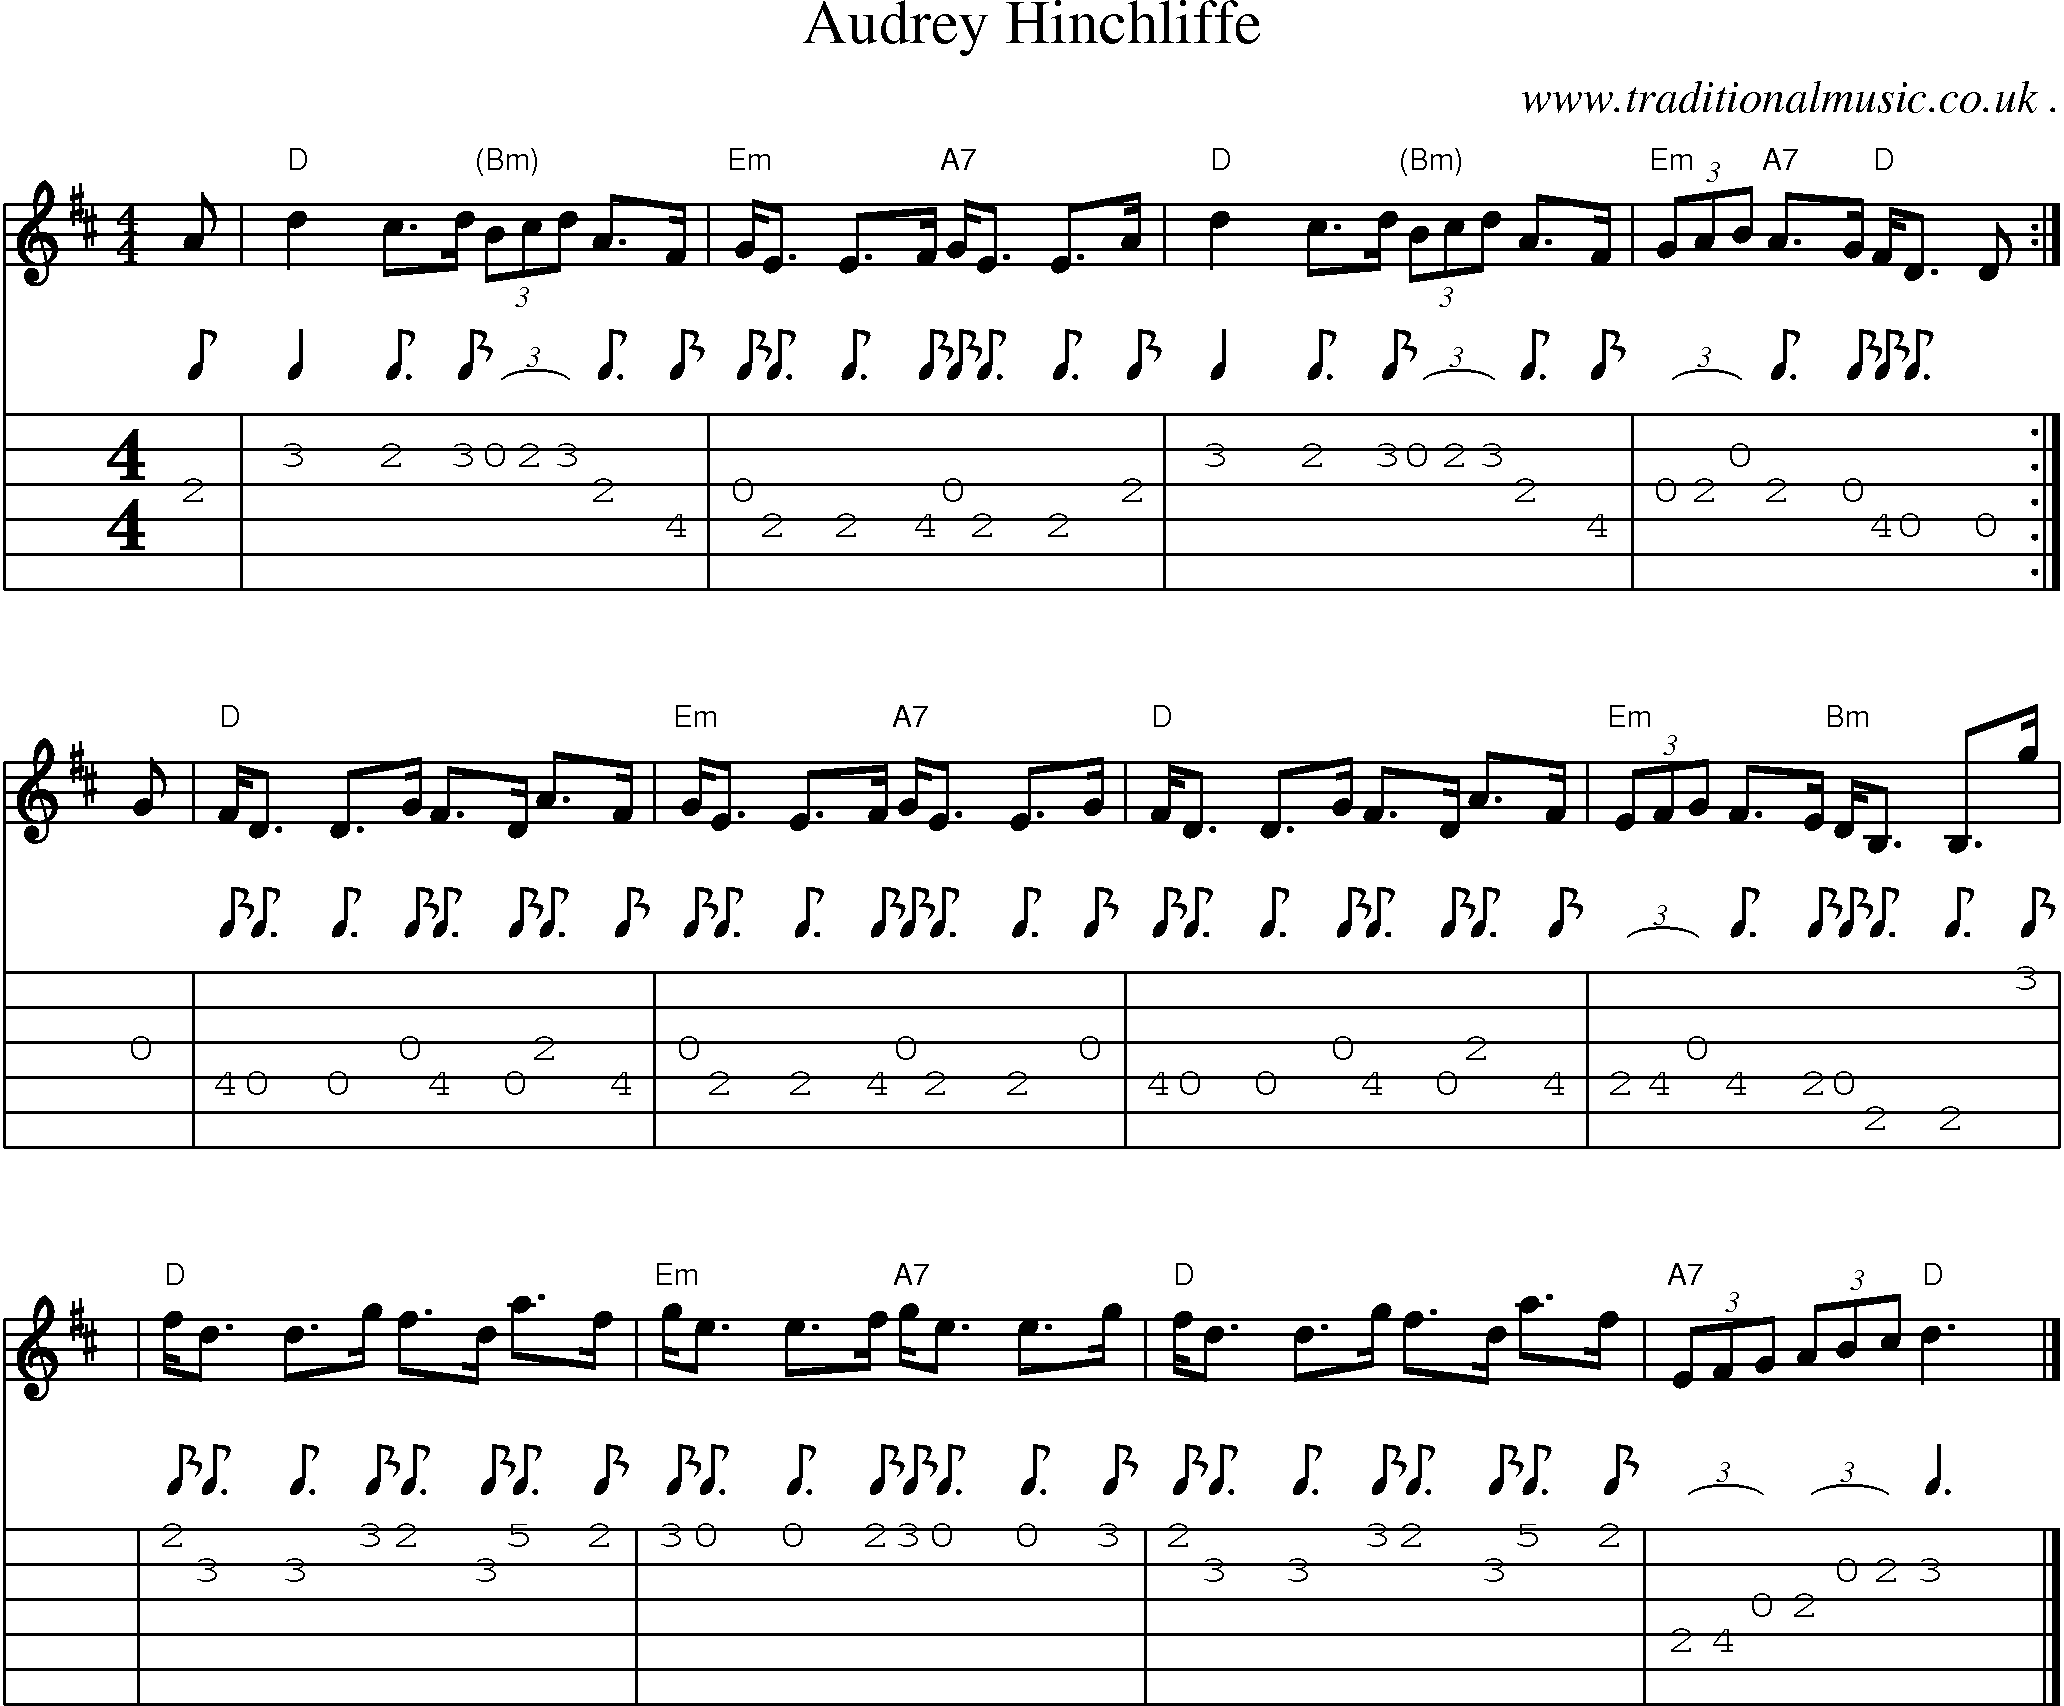 Sheet-music  score, Chords and Guitar Tabs for Audrey Hinchliffe